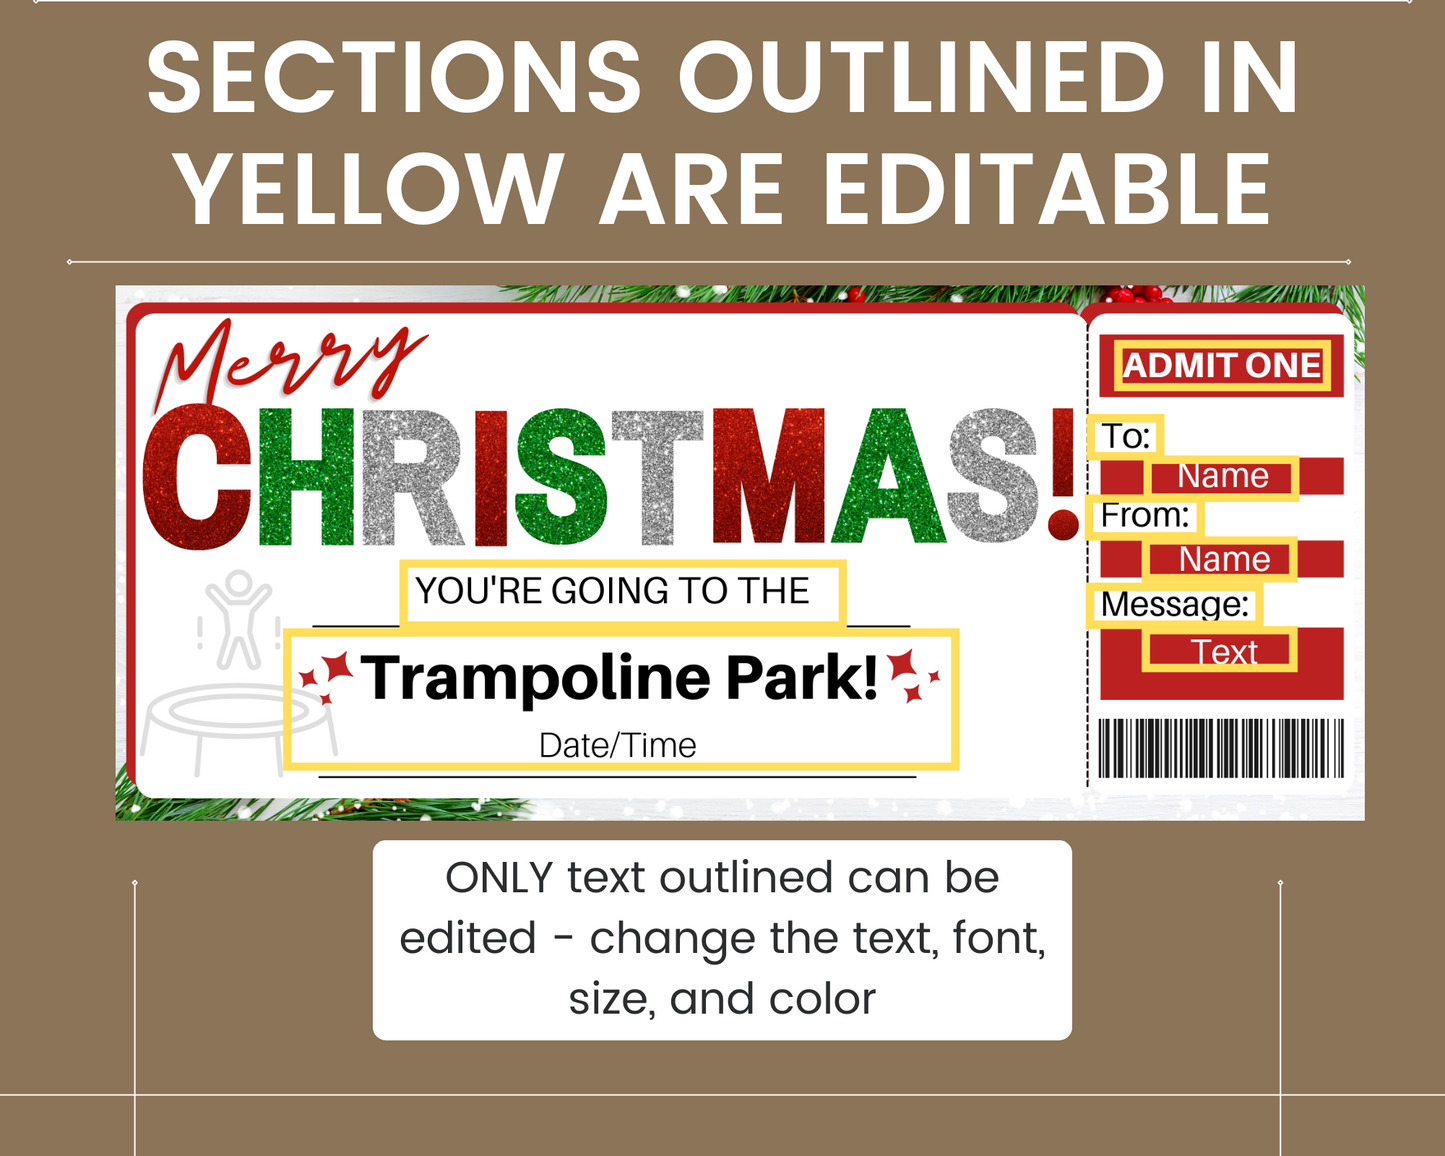 Christmas Trampoline Park Gift Ticket Template